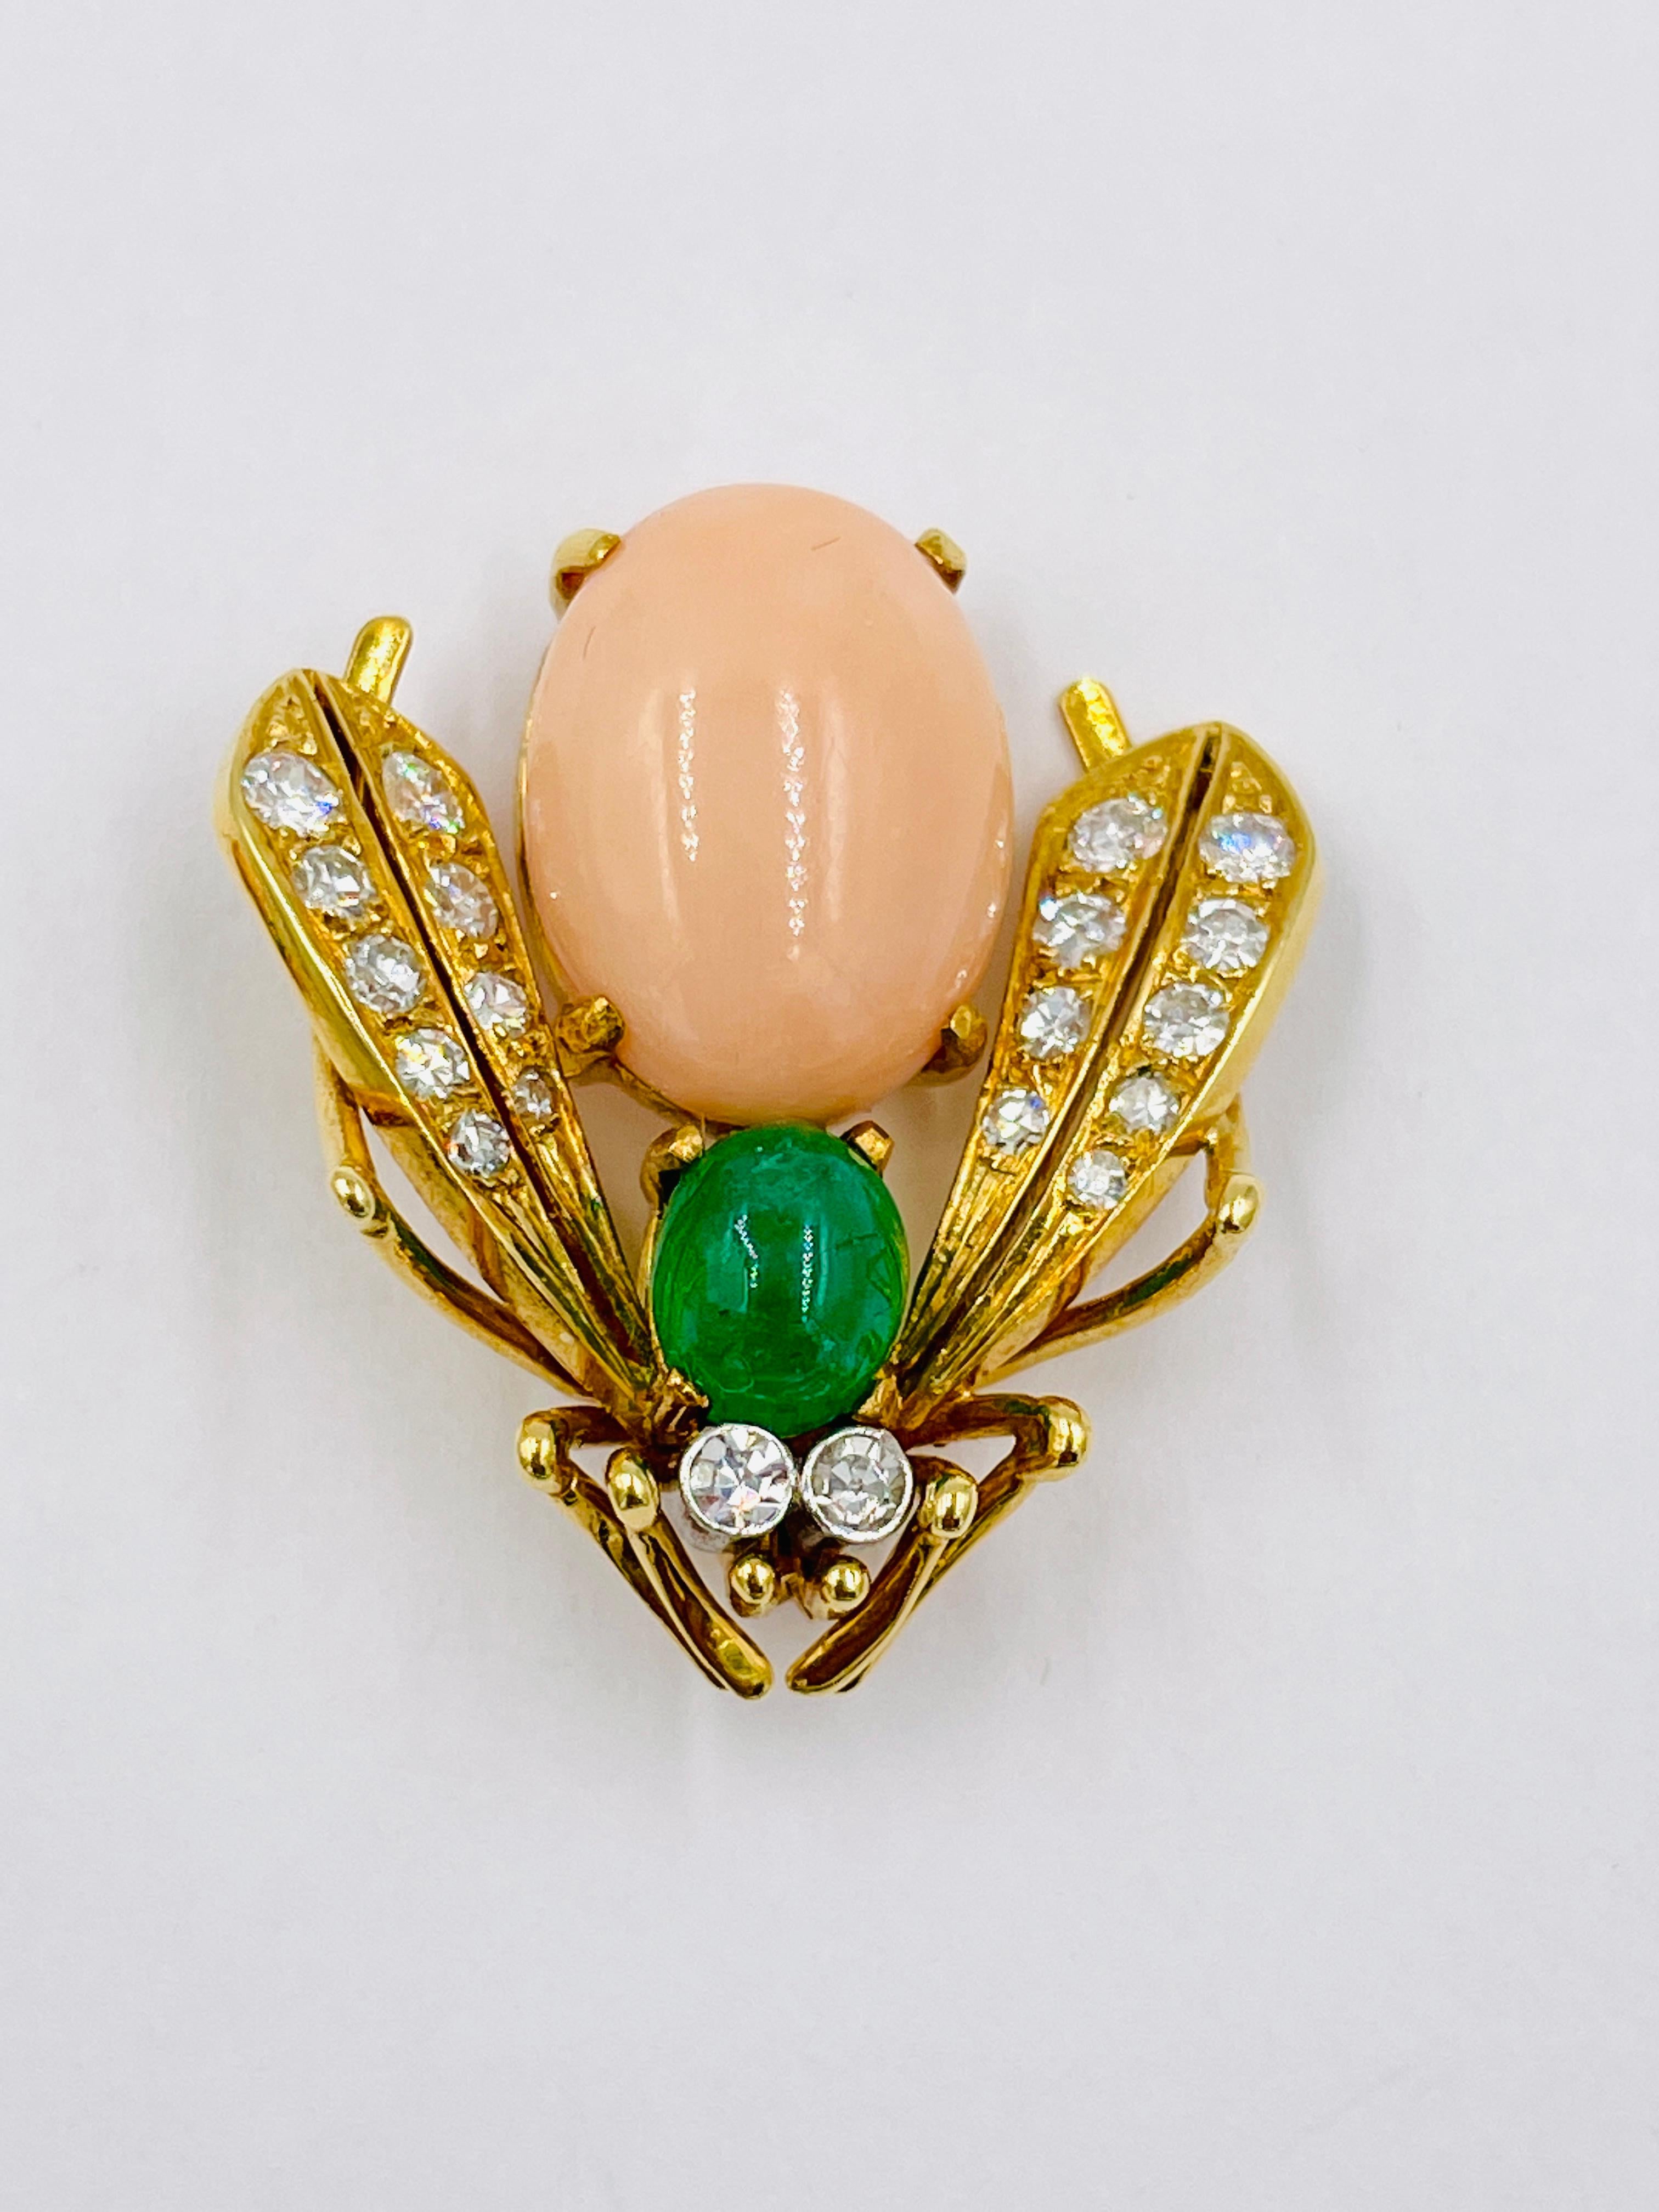 Van Cleef & Arpels pair of bee brooches, circa 1970s.  These pins are quite rare.
Set with Coral, Emerald, and Diamonds set in 18k yellow gold.

Dimension: #1.   1-1/8